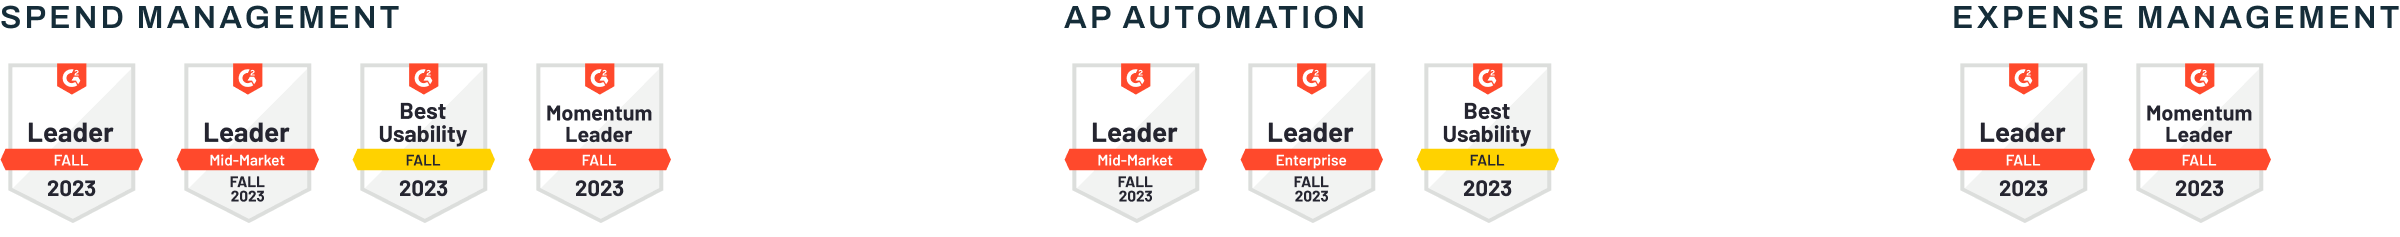 G2 Badges for Spend Management, AP Automation, and Expense Management